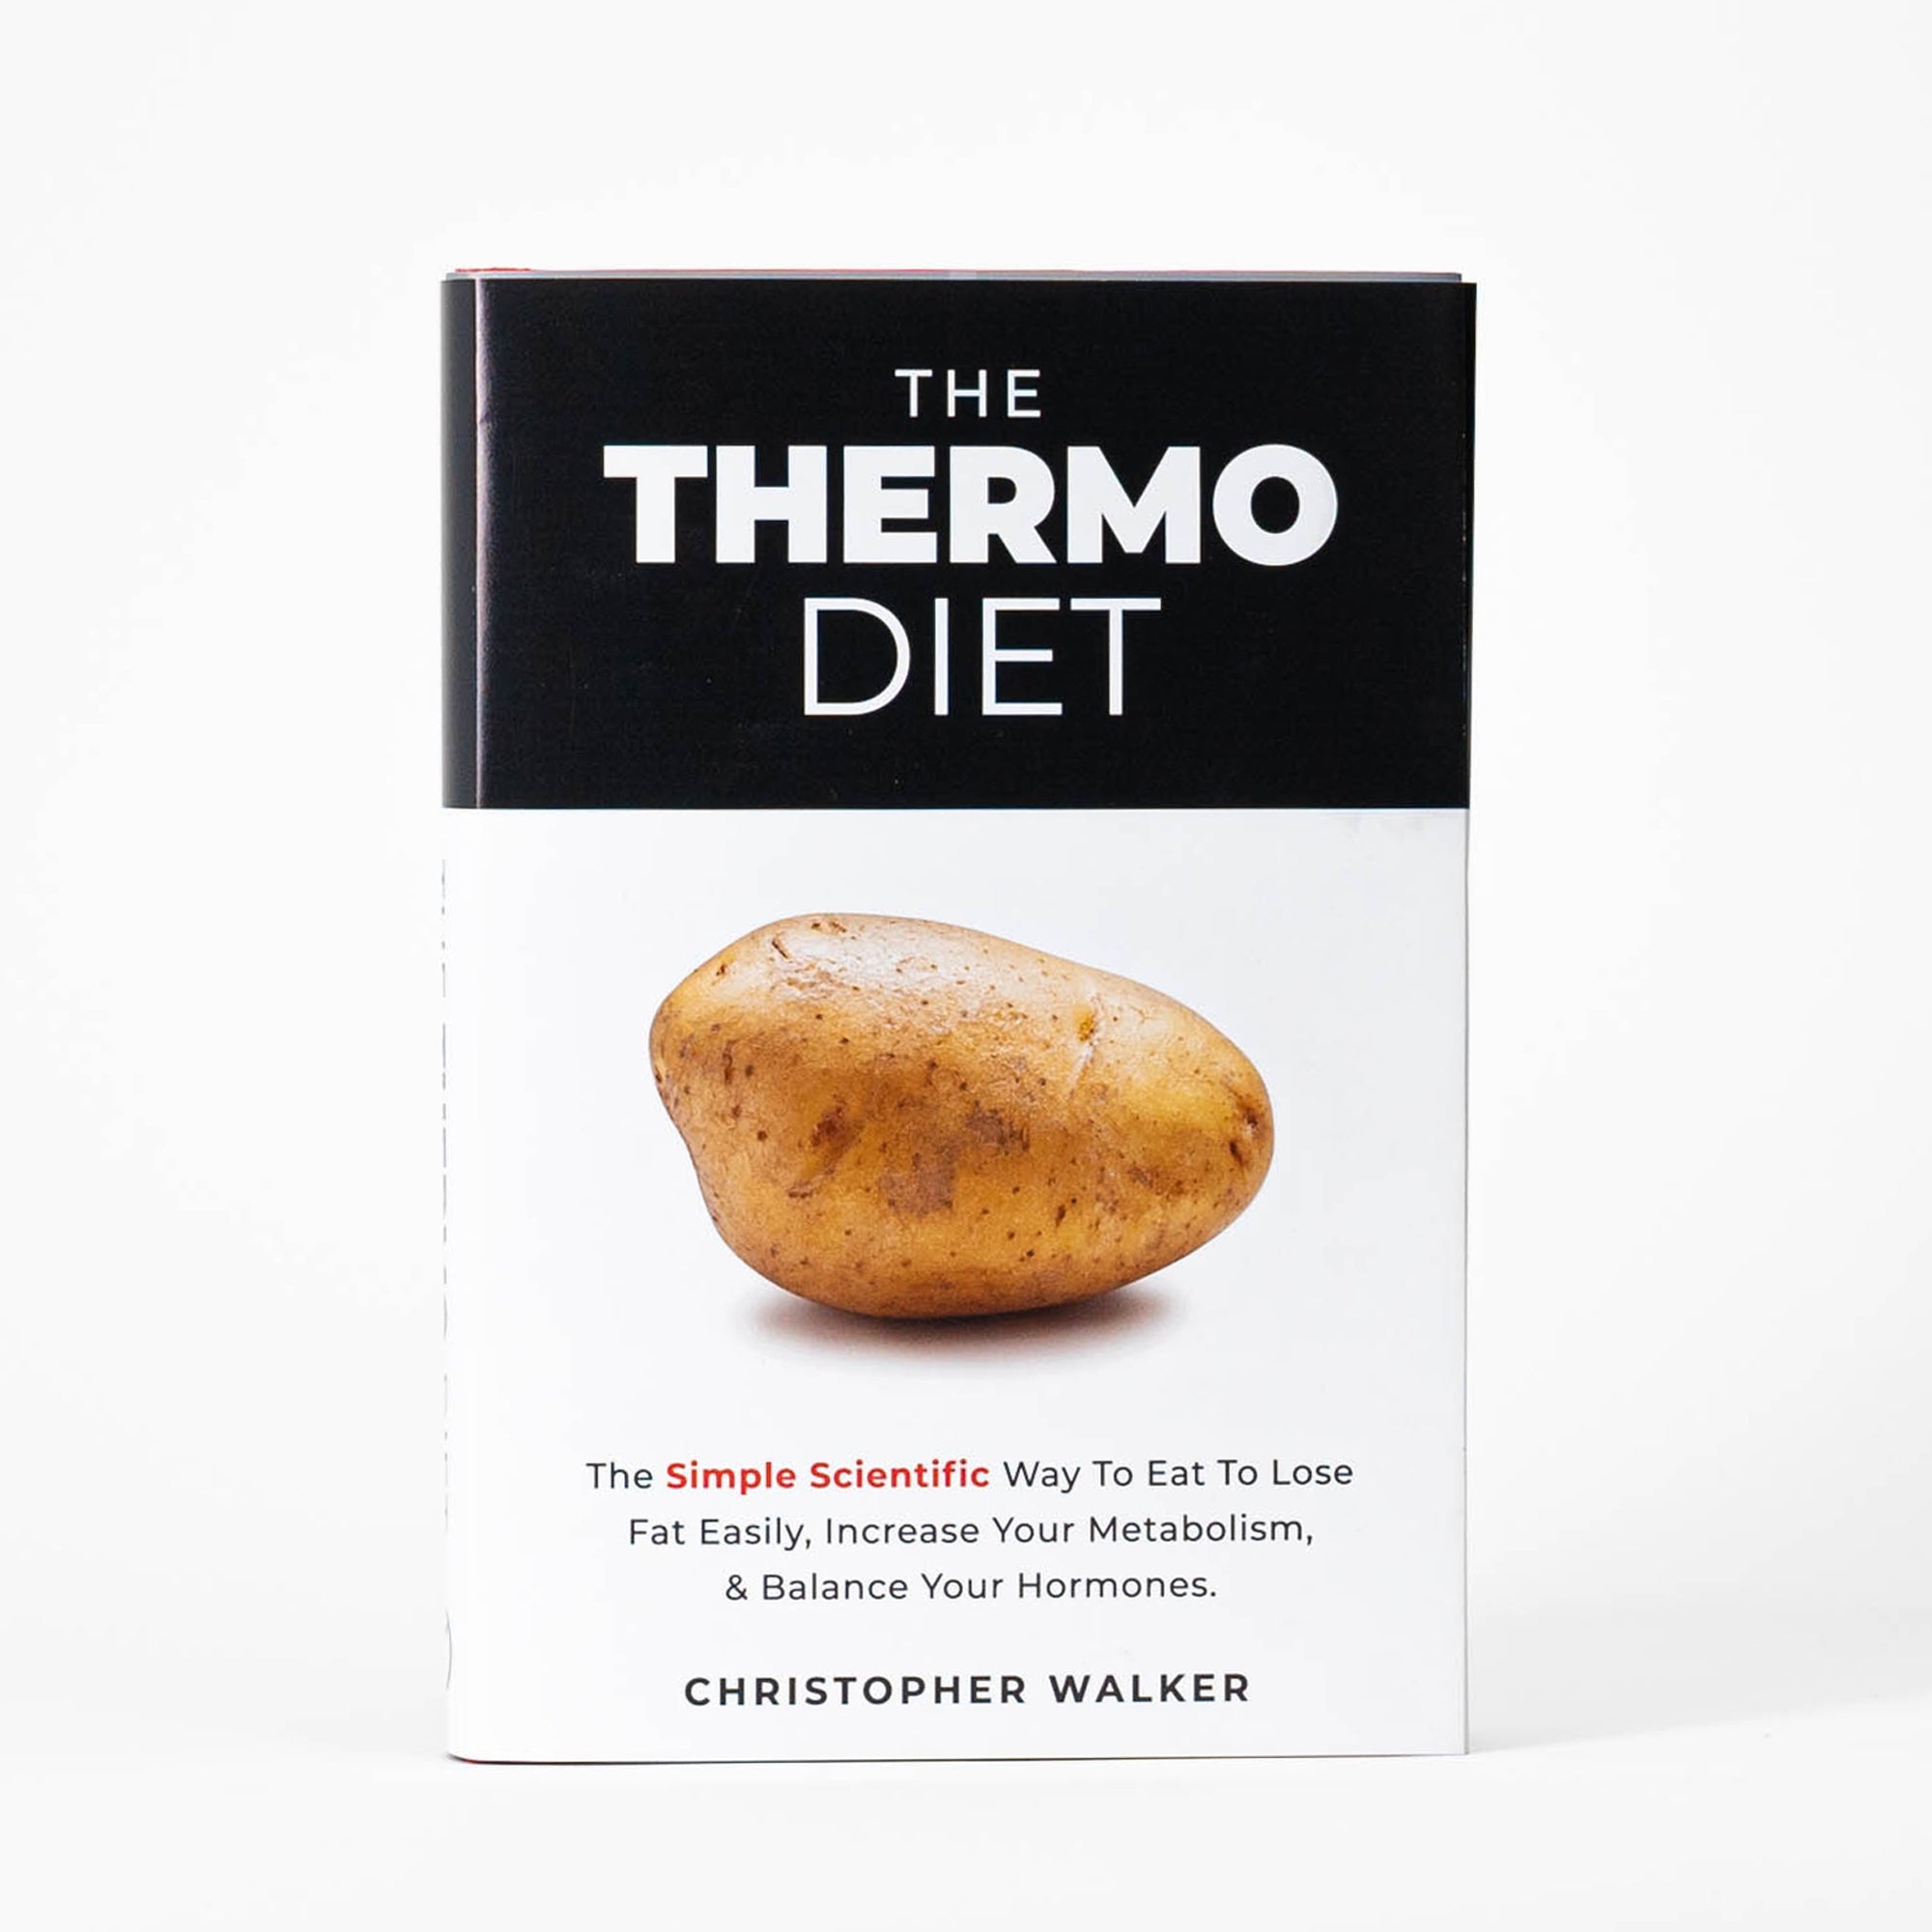  THE THERMO DIET The Simple Scientific Way To Eat To Lose Fat Easily, Increase Your Metabolism, Balance Your Hormones. CHRISTOPHER WALKER 